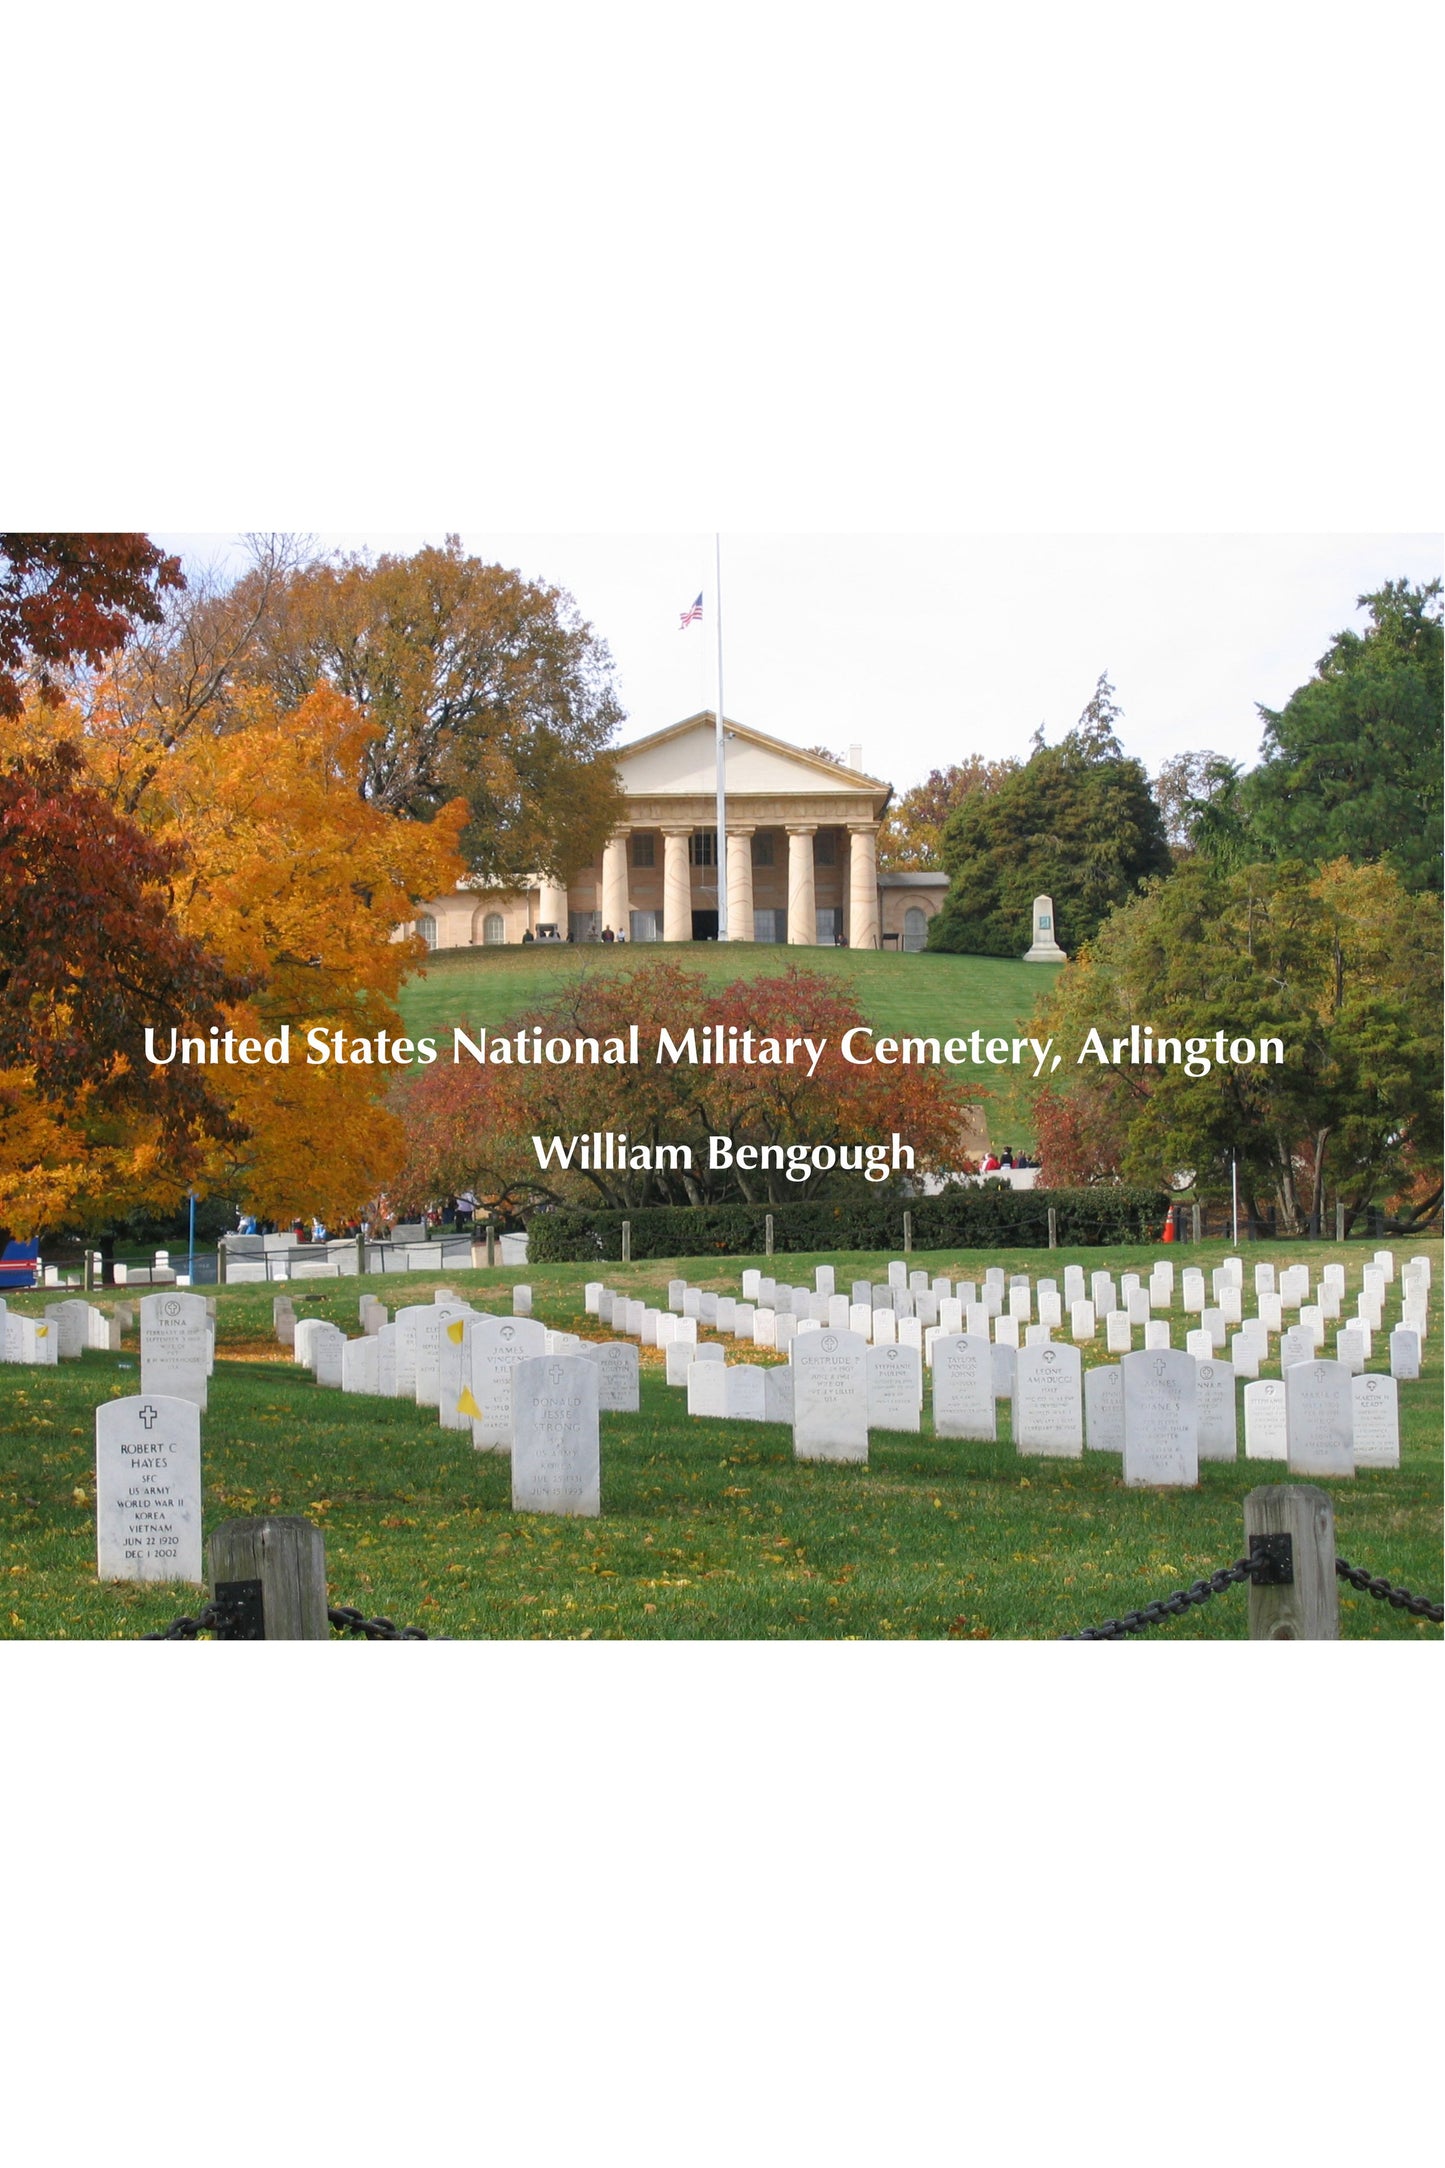 United States National Military Cemetery, Arlington